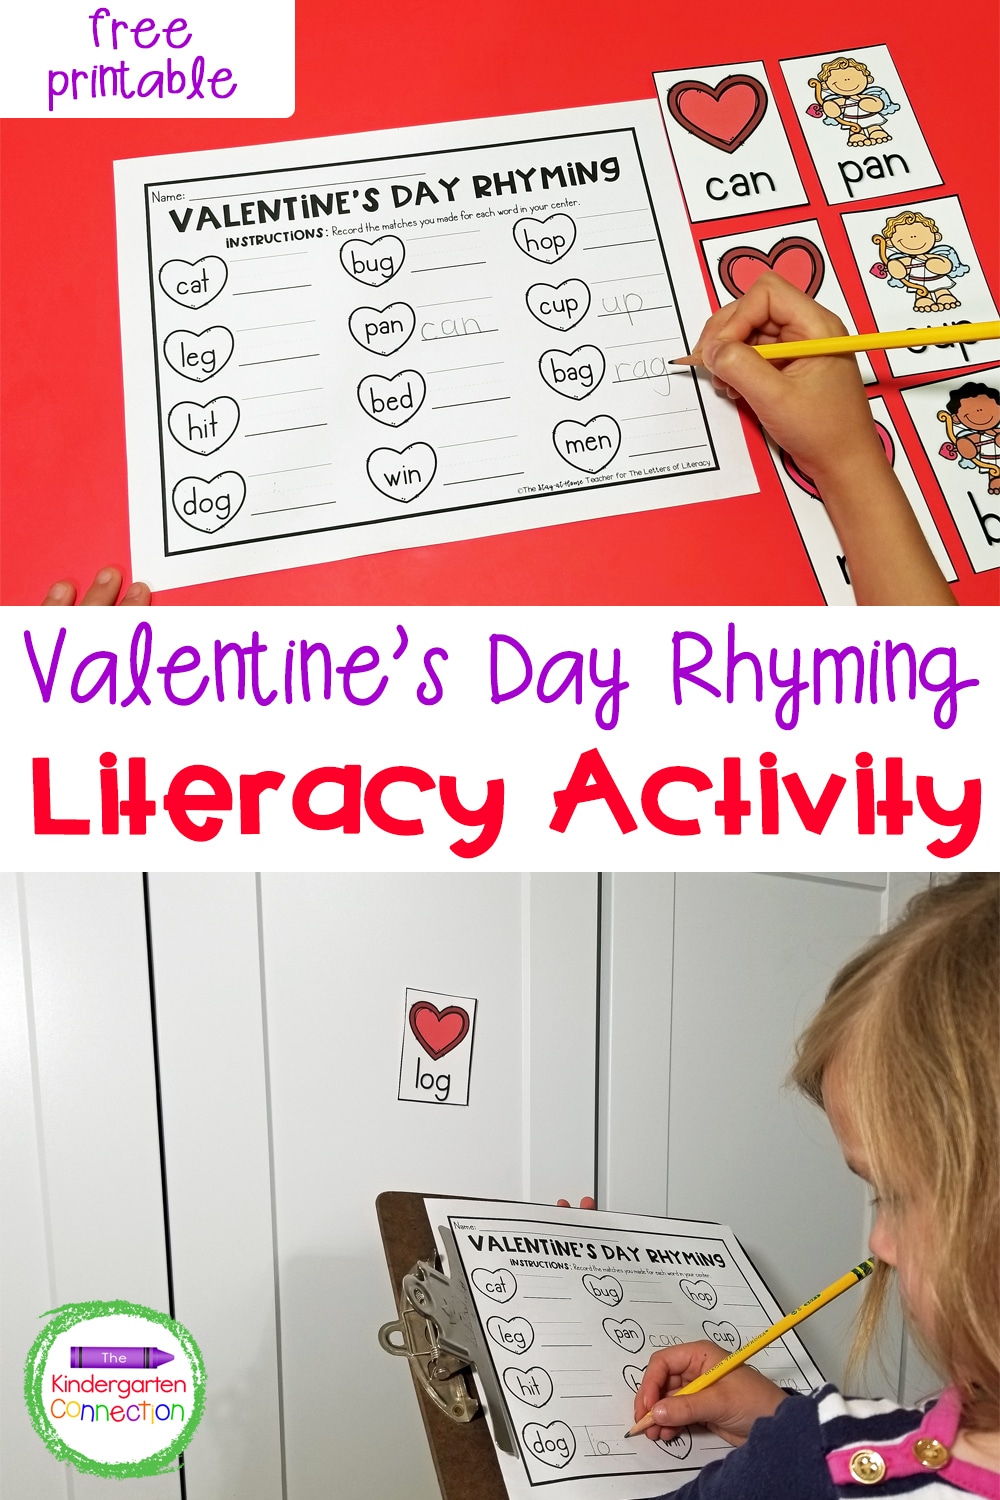 Grab this free Valentine's Day Rhyming Activity for your Kindergarten or 1st grade literacy centers! It's easy-prep and has multiple ways to play!